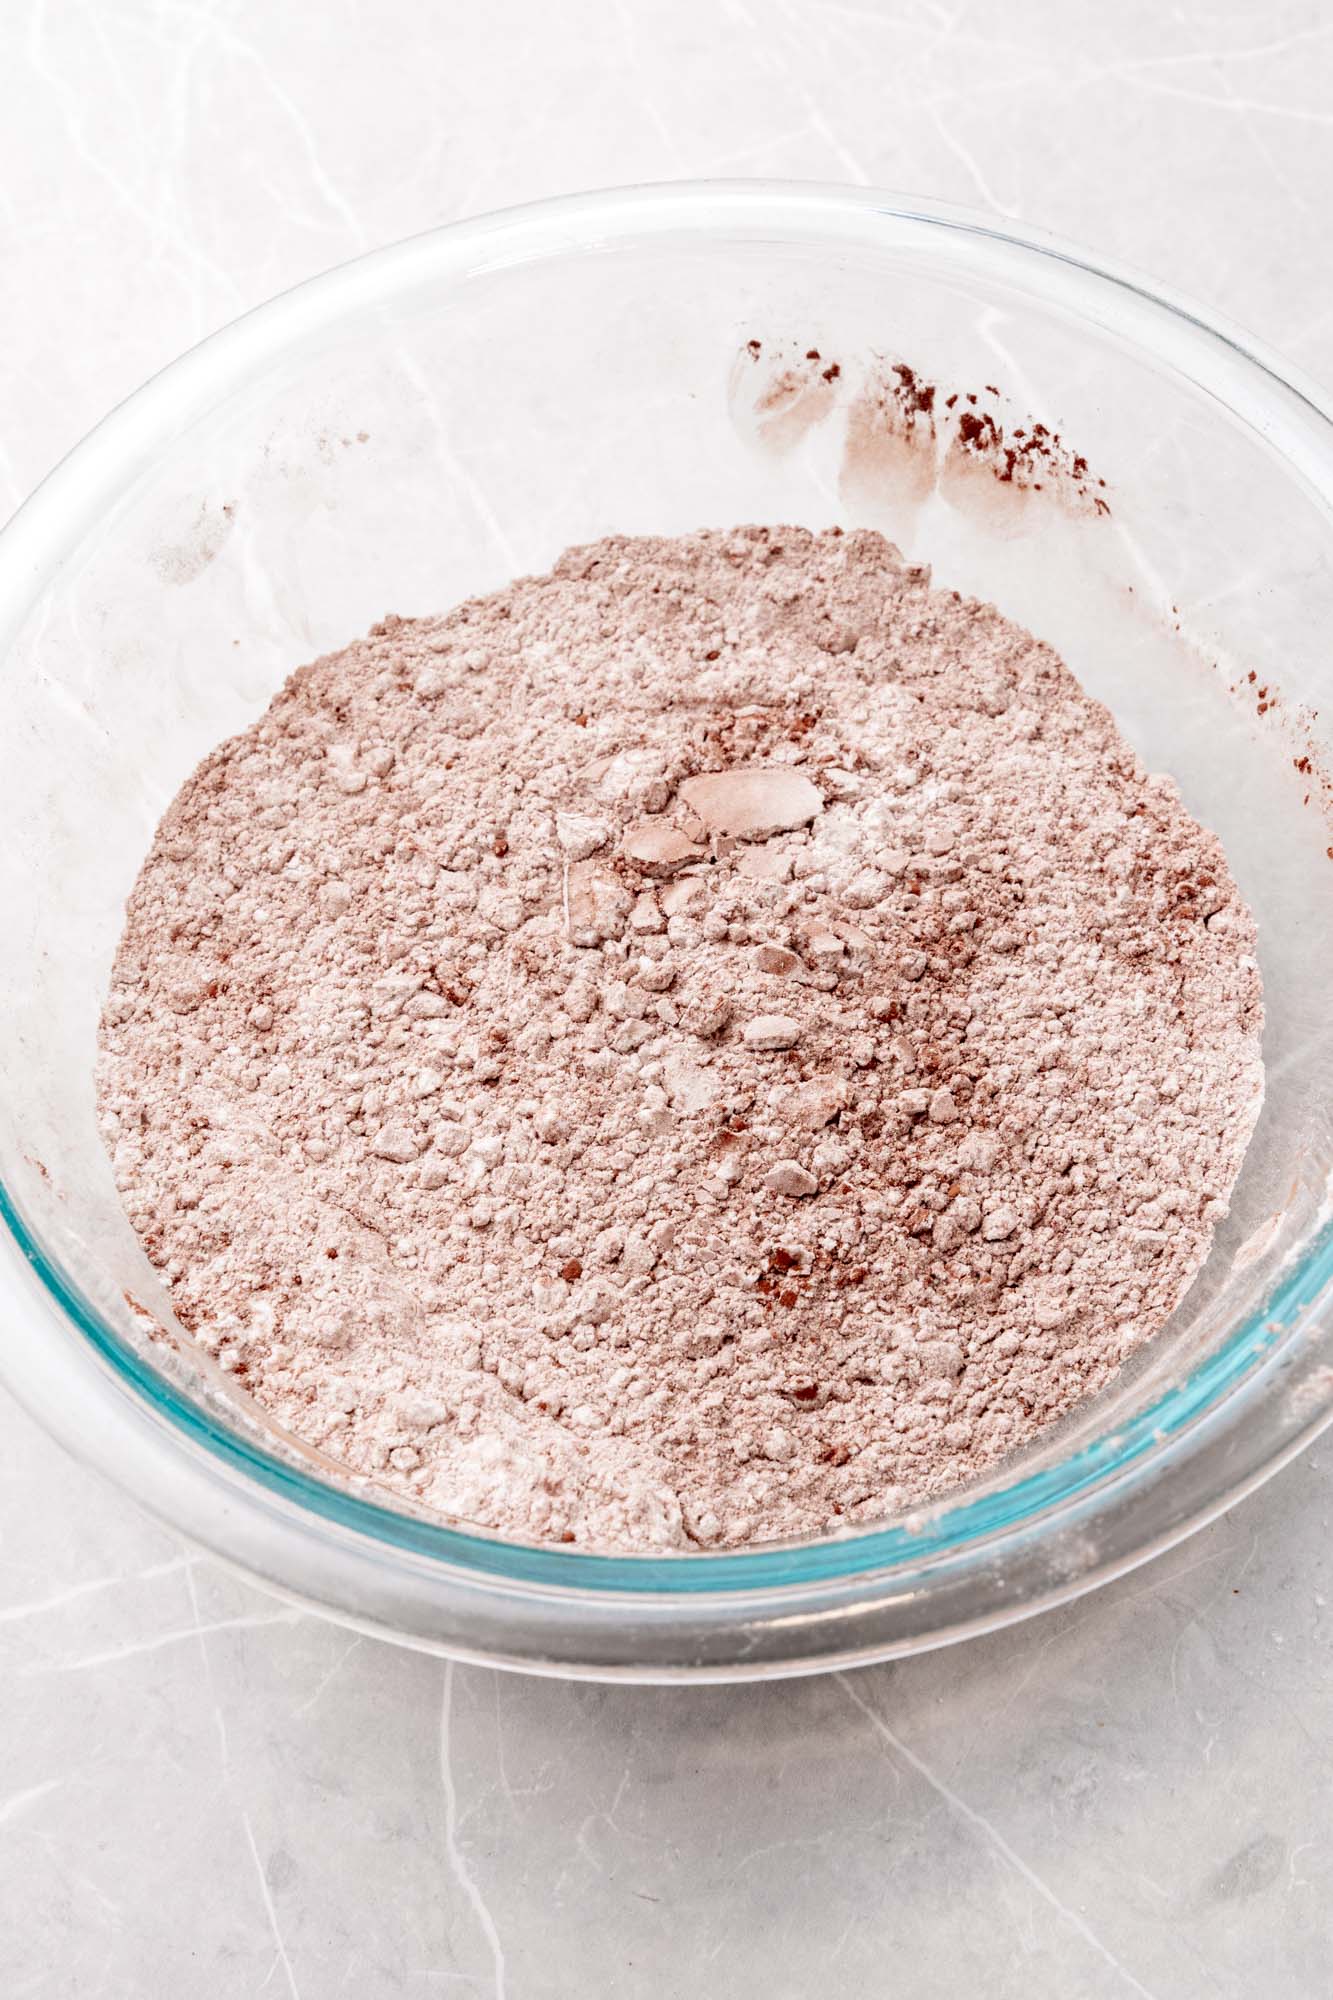 cocoa powder whisked into flour in a clear glass mixing bowl.